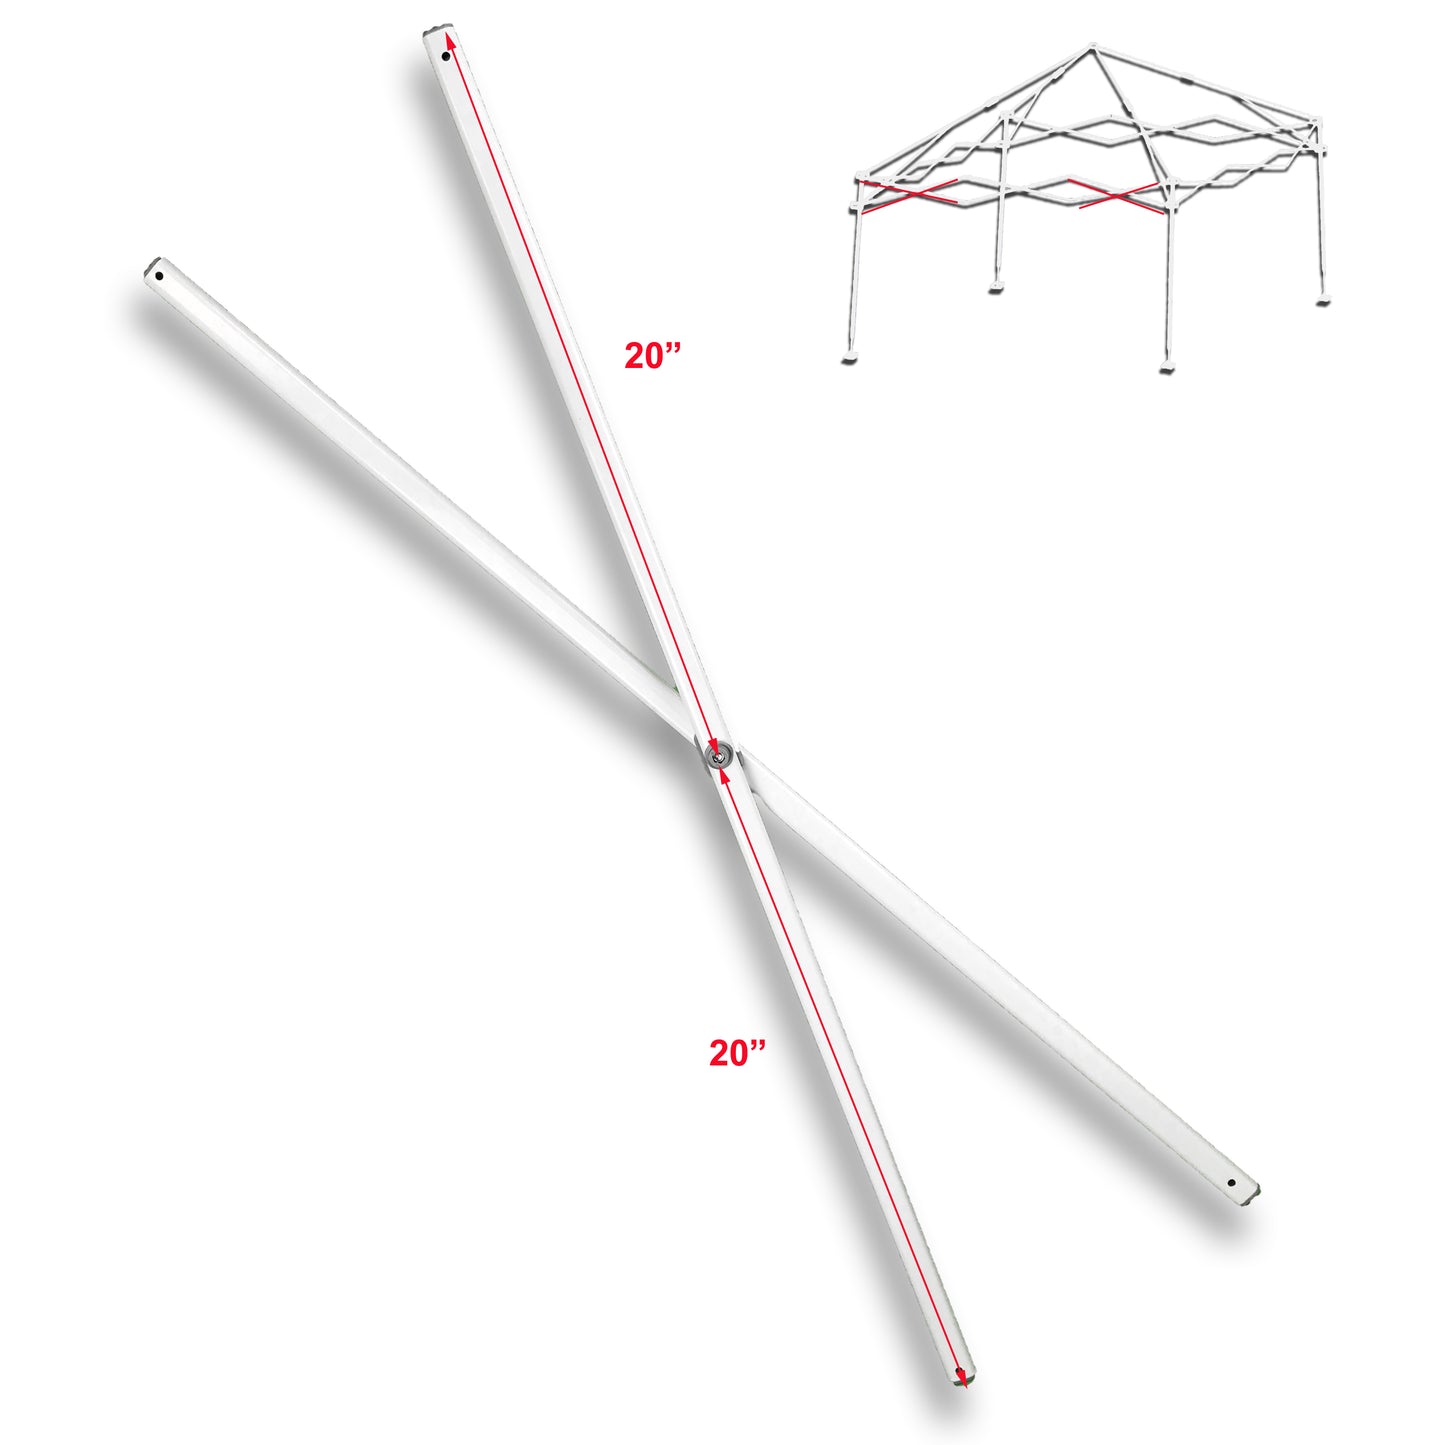 This photo showcases the E-Z UP Envoy 10' X 10' Instant Canopy Gazebo Side TRUSS Bar Replacement Parts. Additionally, it's highlighted that the distance from the edge to the center on both sides is consistent, measuring 20 inches on each side. In the background, there is a frame, marked in red, indicating the precise location of these spare parts within the canopy structure.